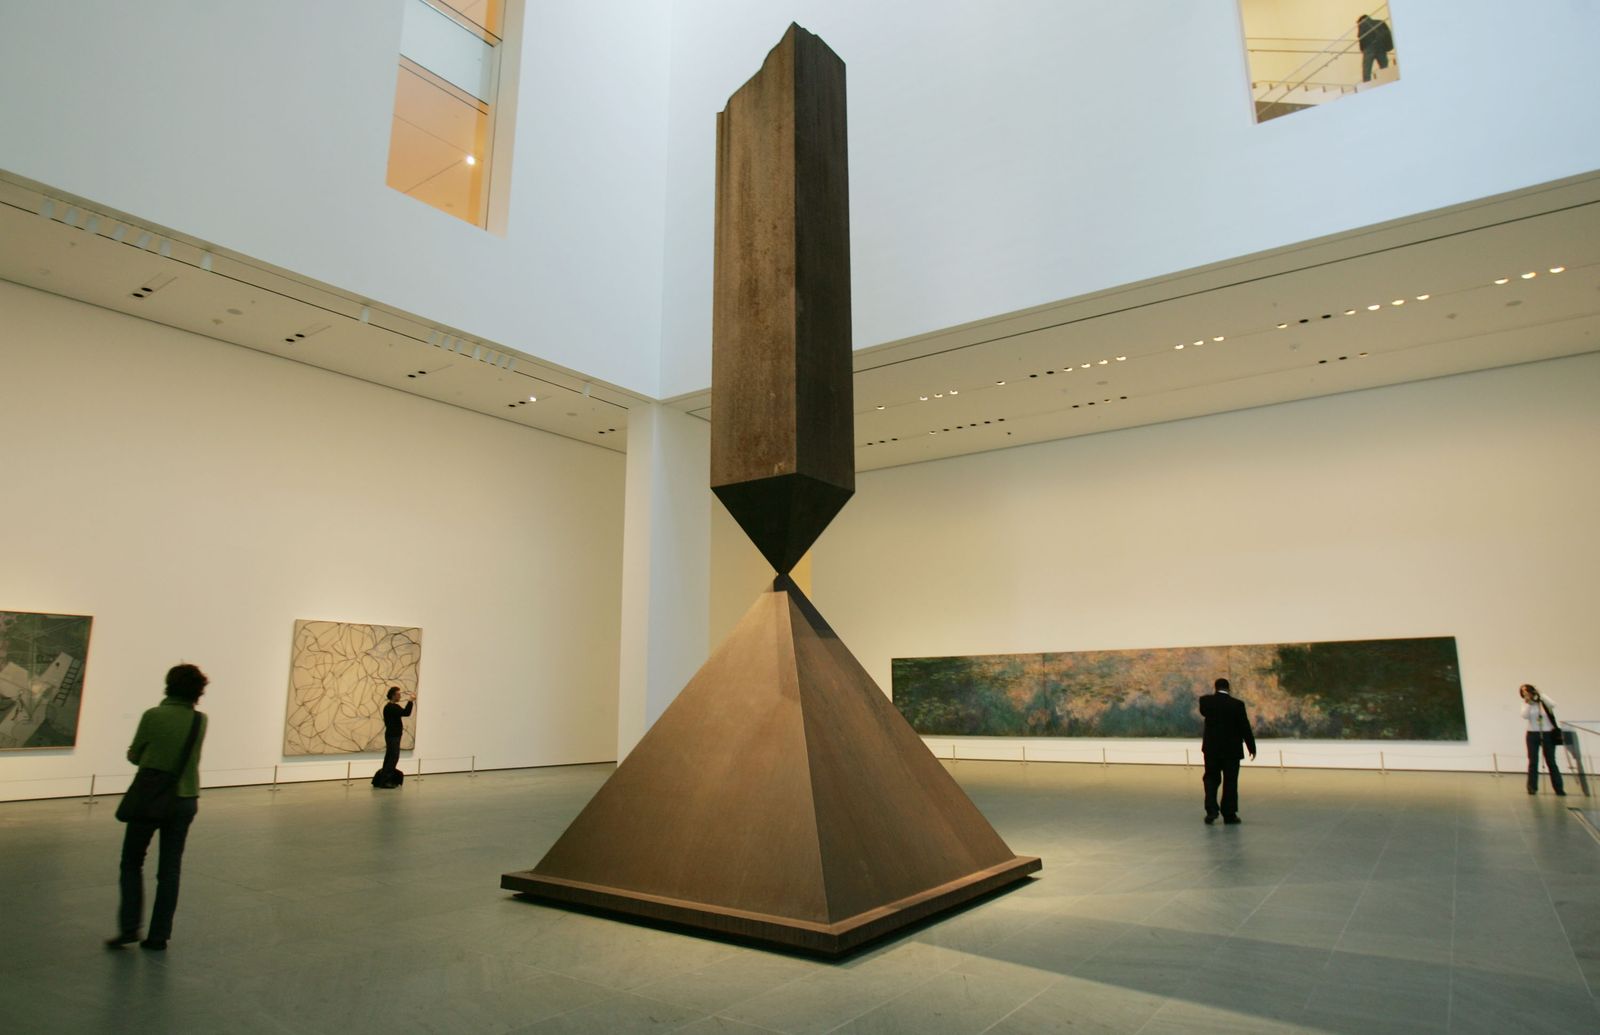 The Museum of Modern Art Now Offers Free Online | Smart News | Smithsonian Magazine